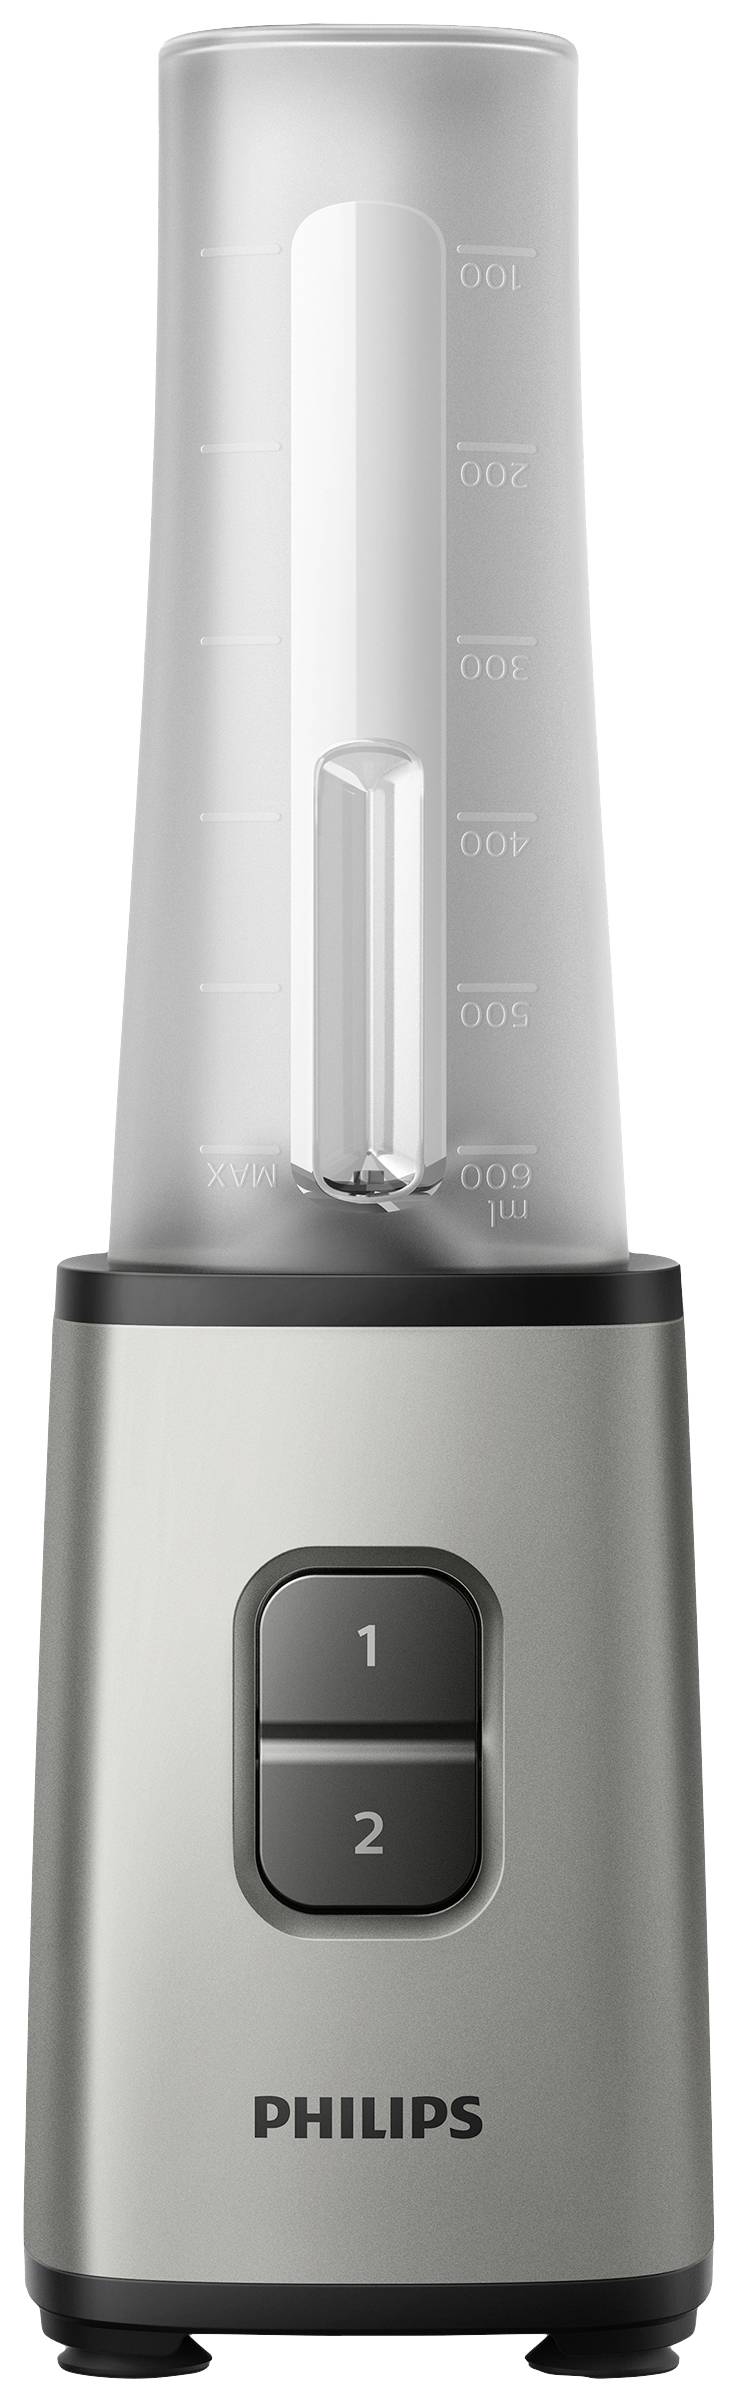 PHILIPS HR2600/80 Daily Collection Mini-Standmixer 350W mit mobiler Trinkflasche